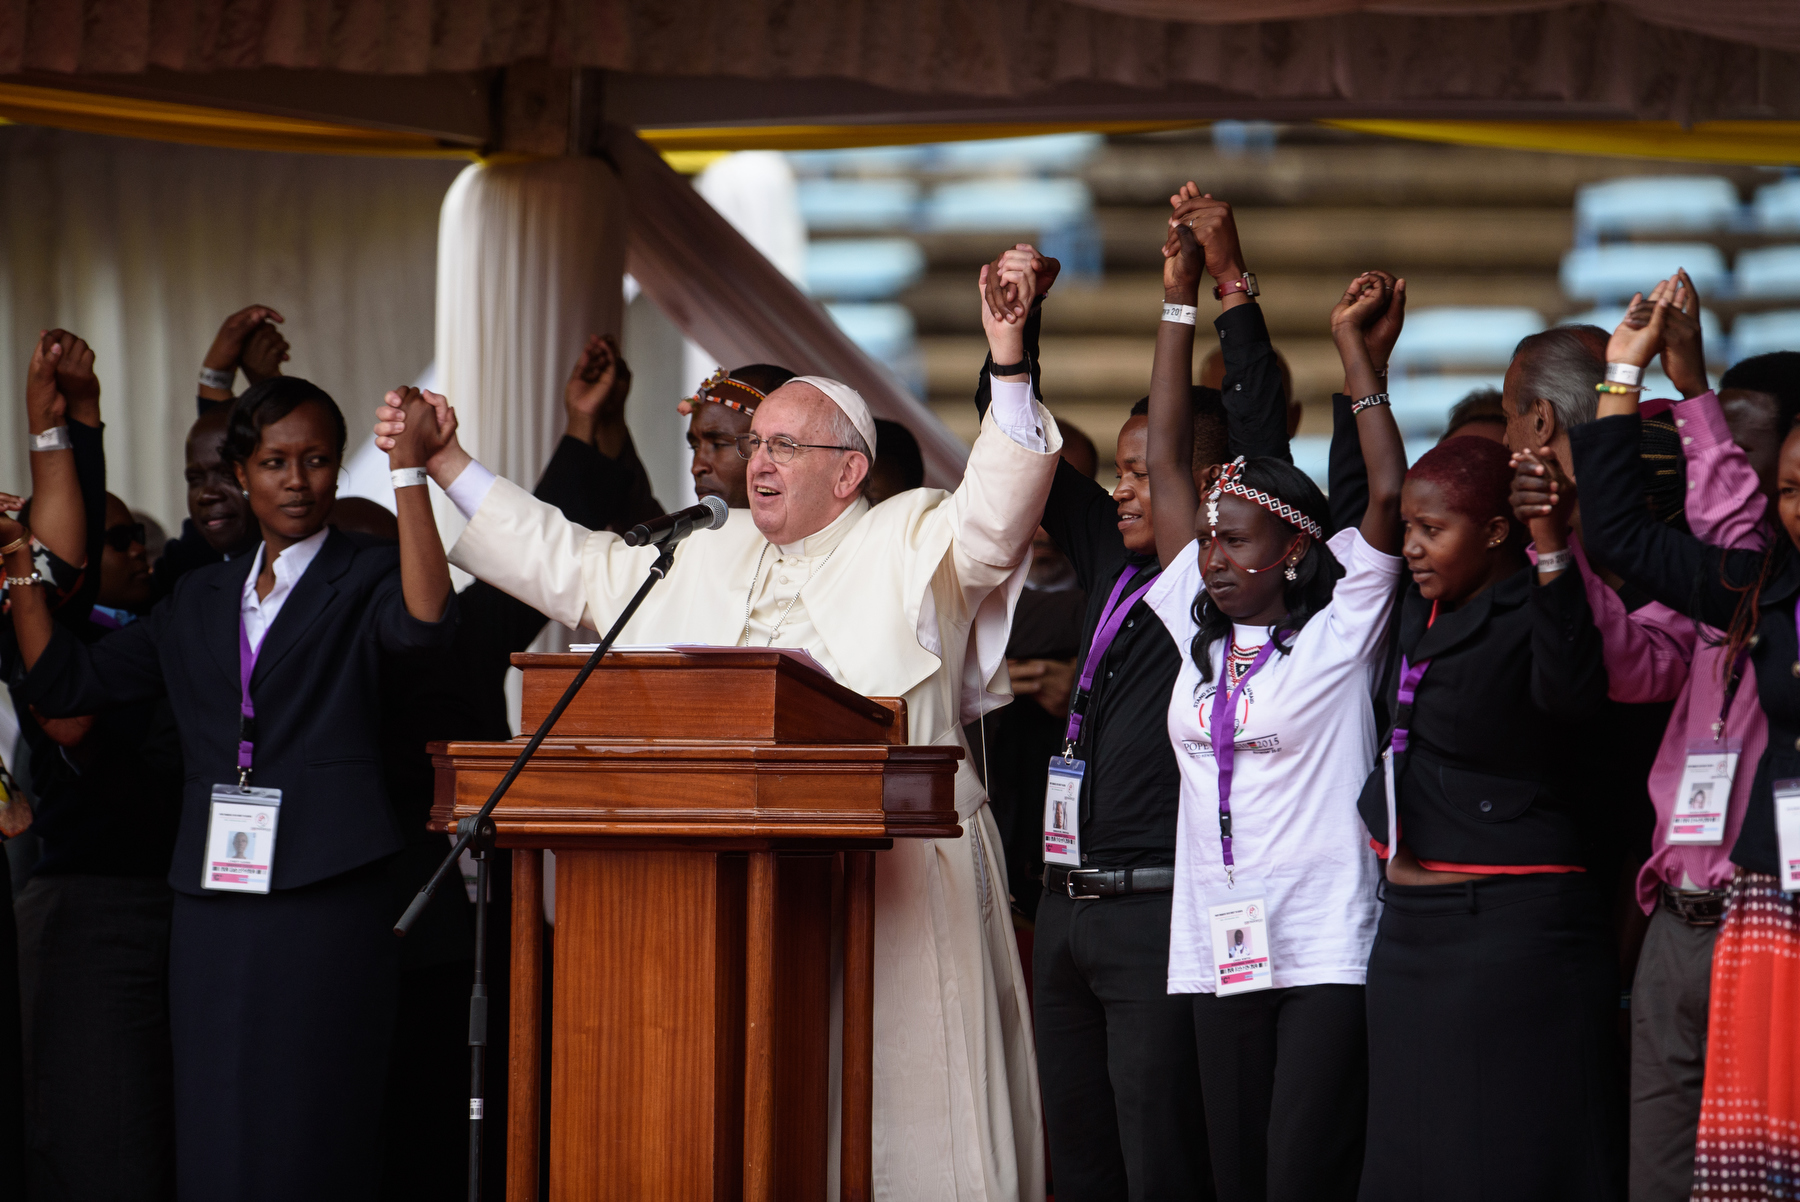  Pope Francis asked East African youth to join hands and avoid tribalism at Kasarani stadium in Nairobi on 27 November 2015. He spoke on the themes of tribalism, radicalization and corruption. Pope Francis is on a five-day visit to Kenya, Uganda and 